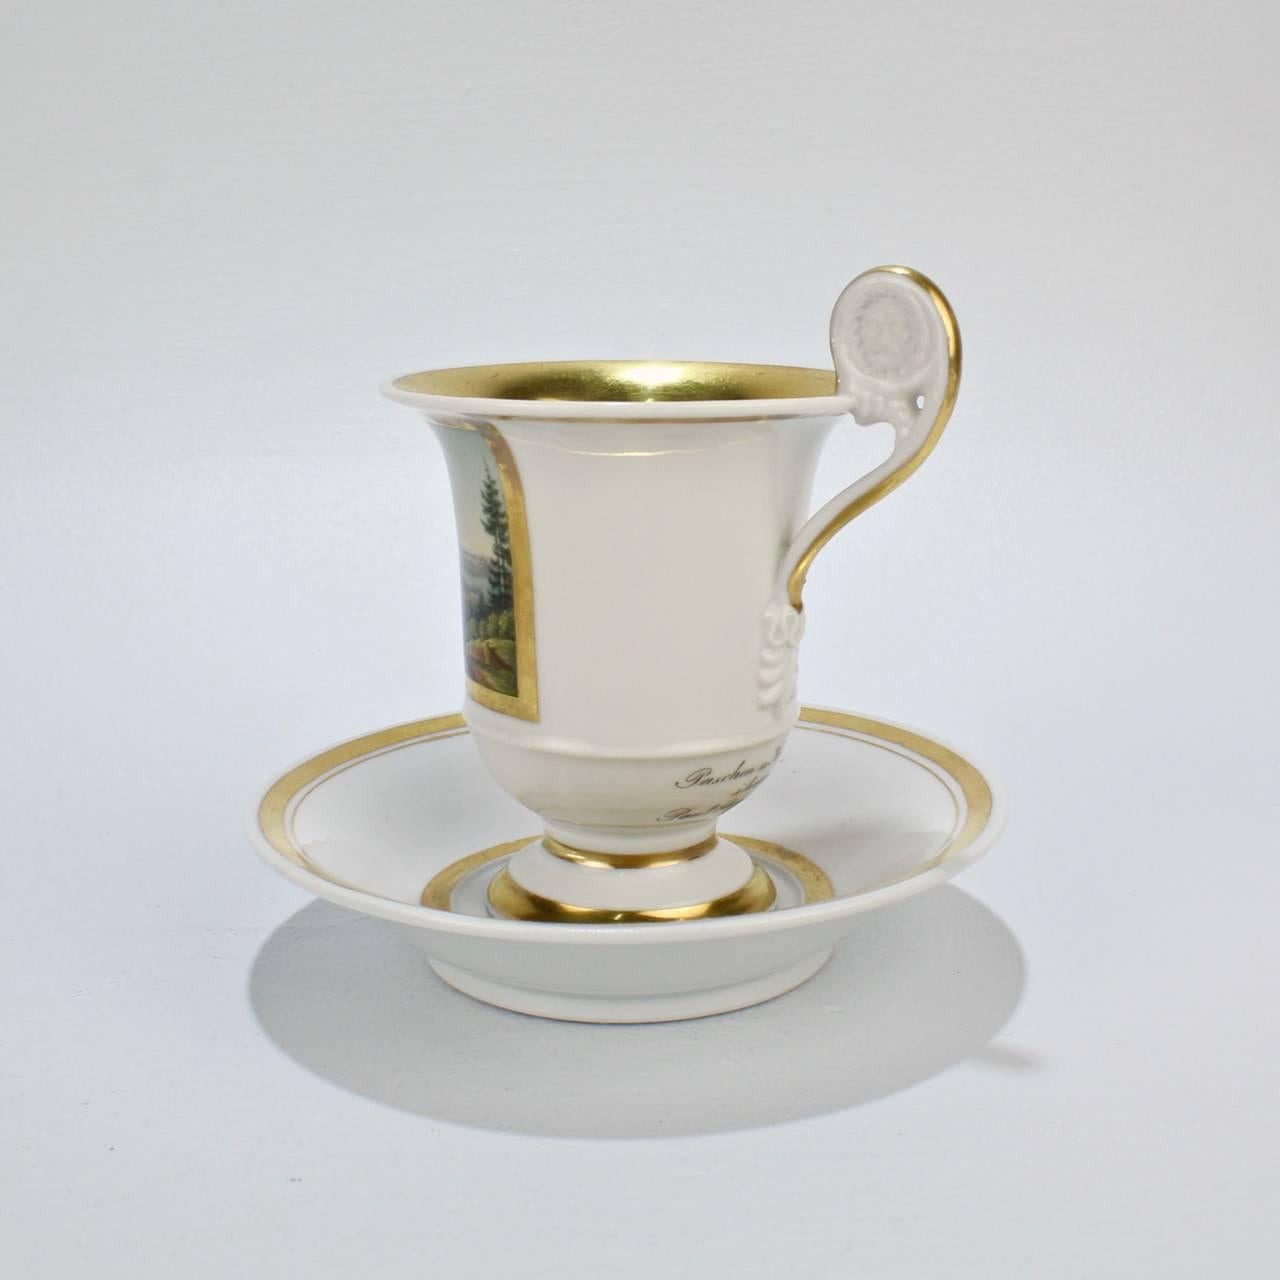 Early 19th Century Biedermeier Period Topographical Porcelain Cup and Saucer For Sale 2